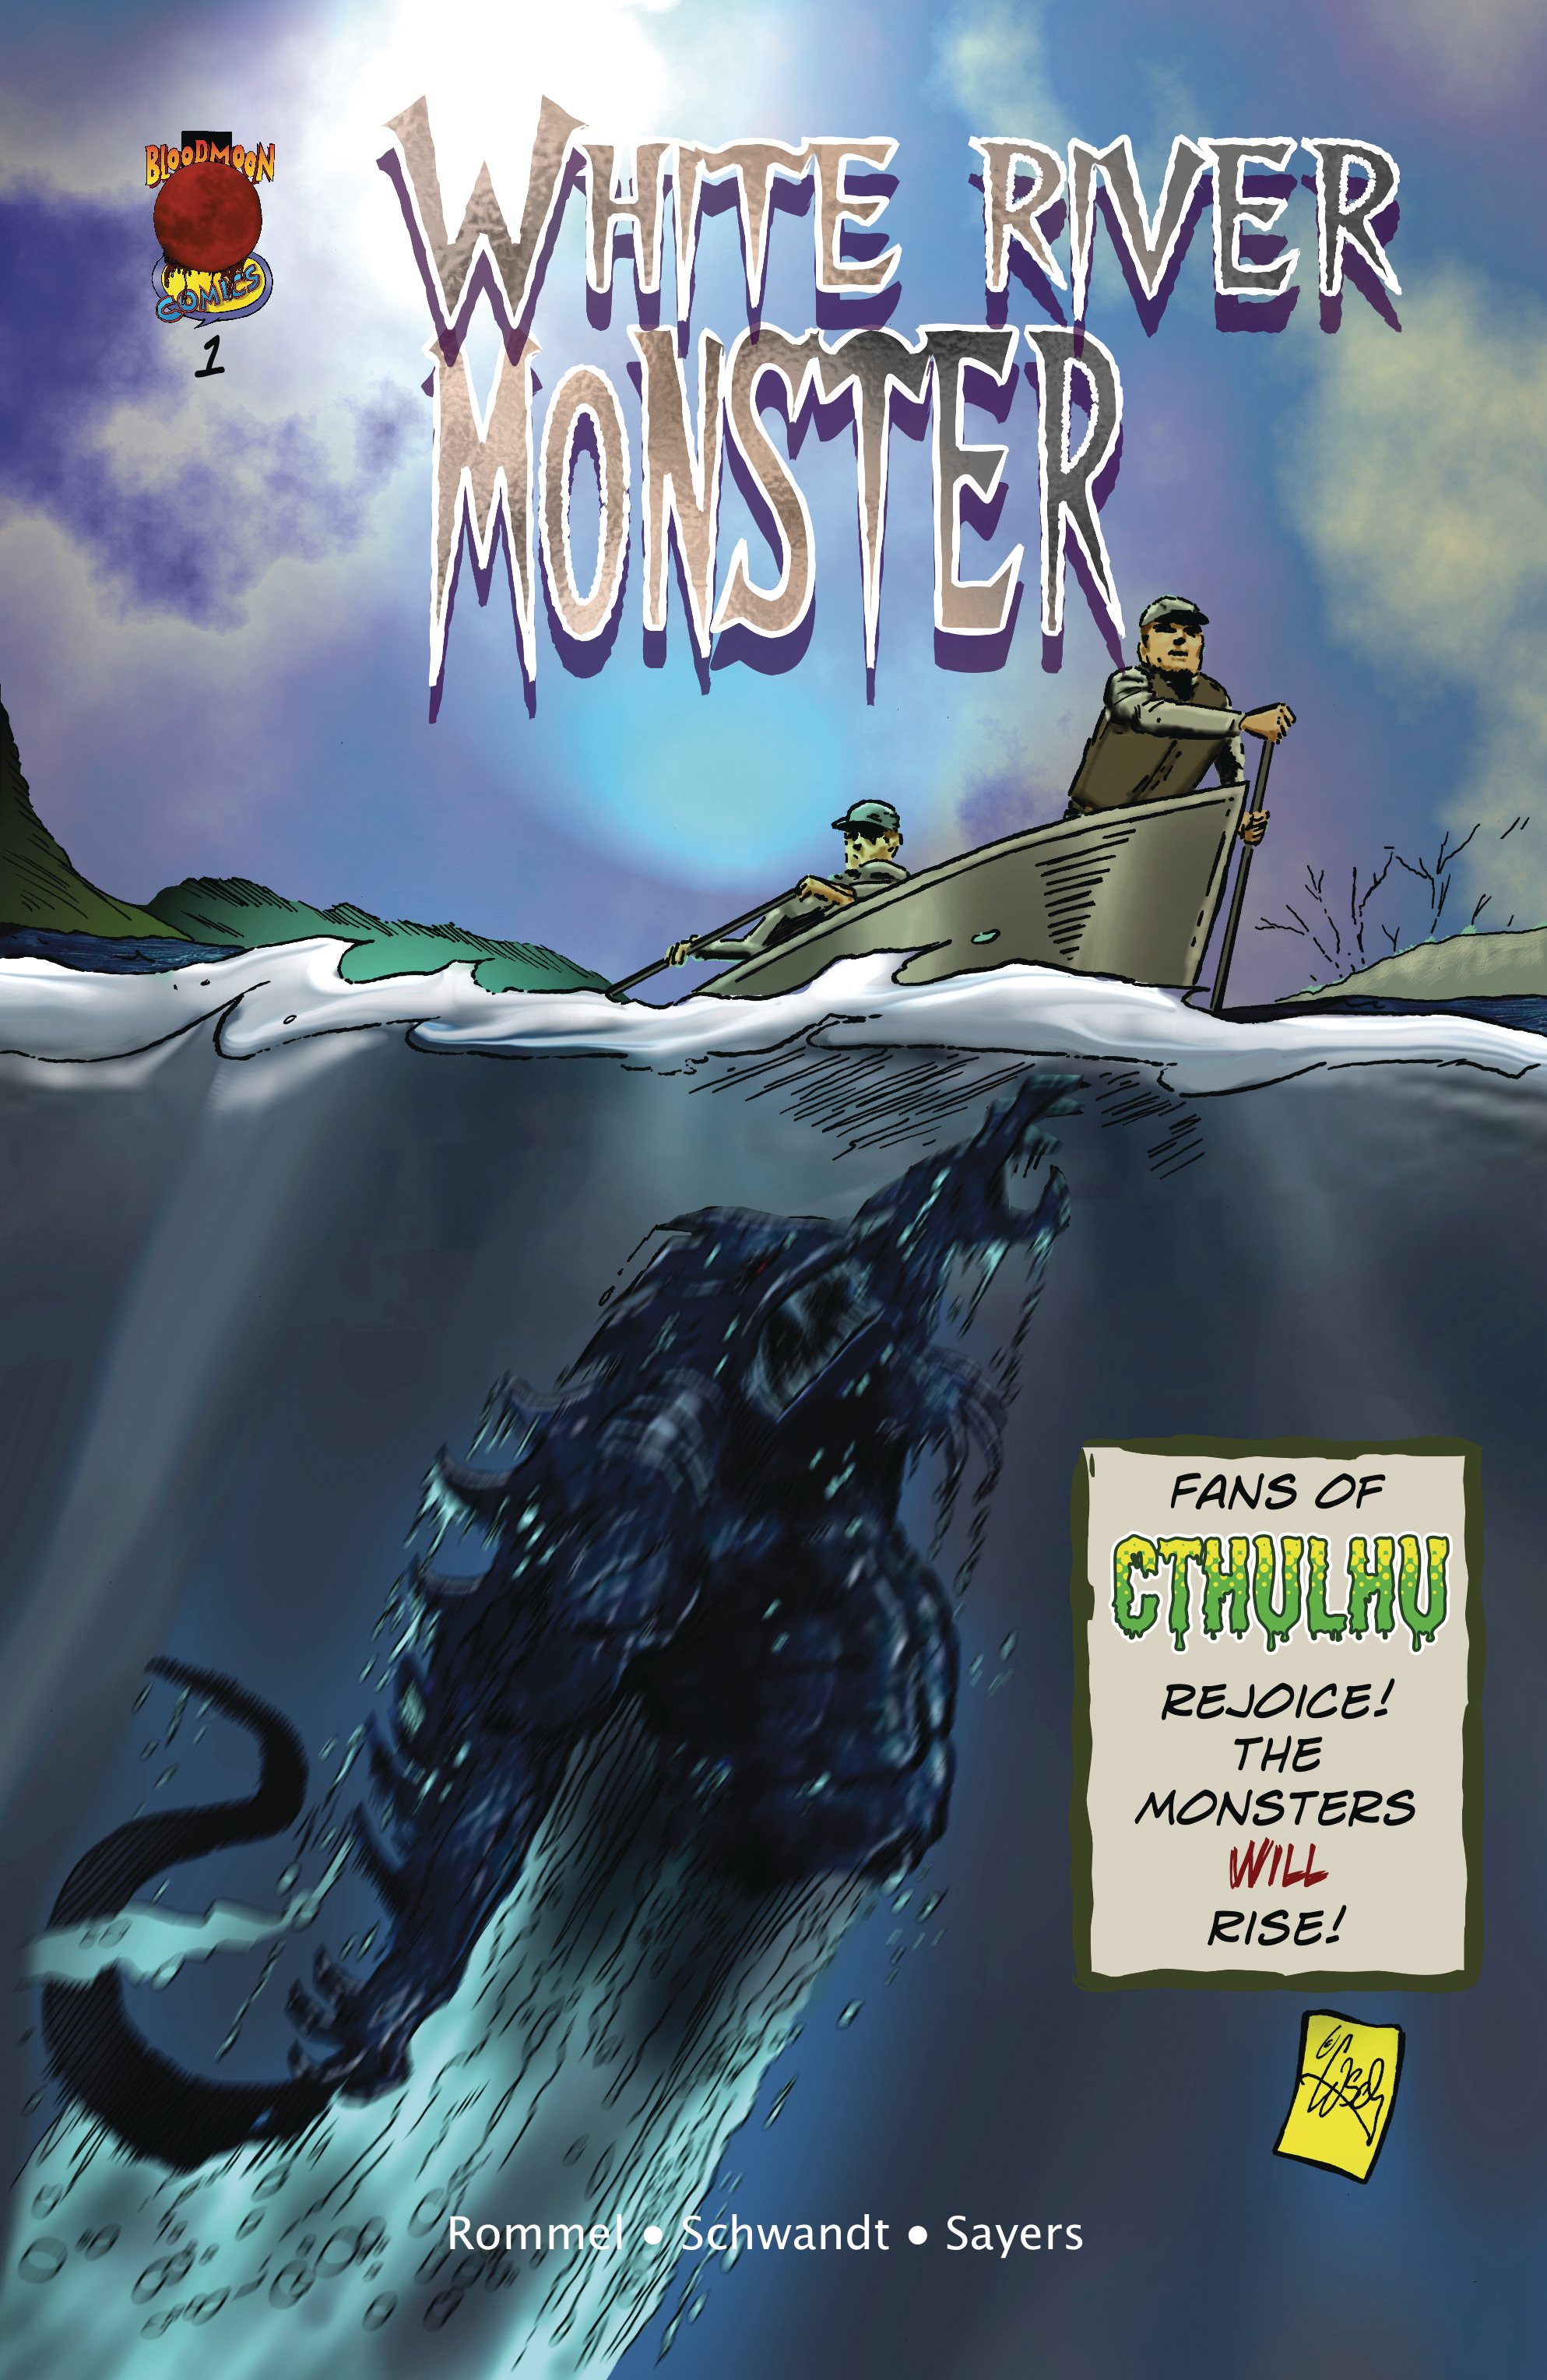 White River Monster #1 Cover A Wolfgang Schwandt (Mature)